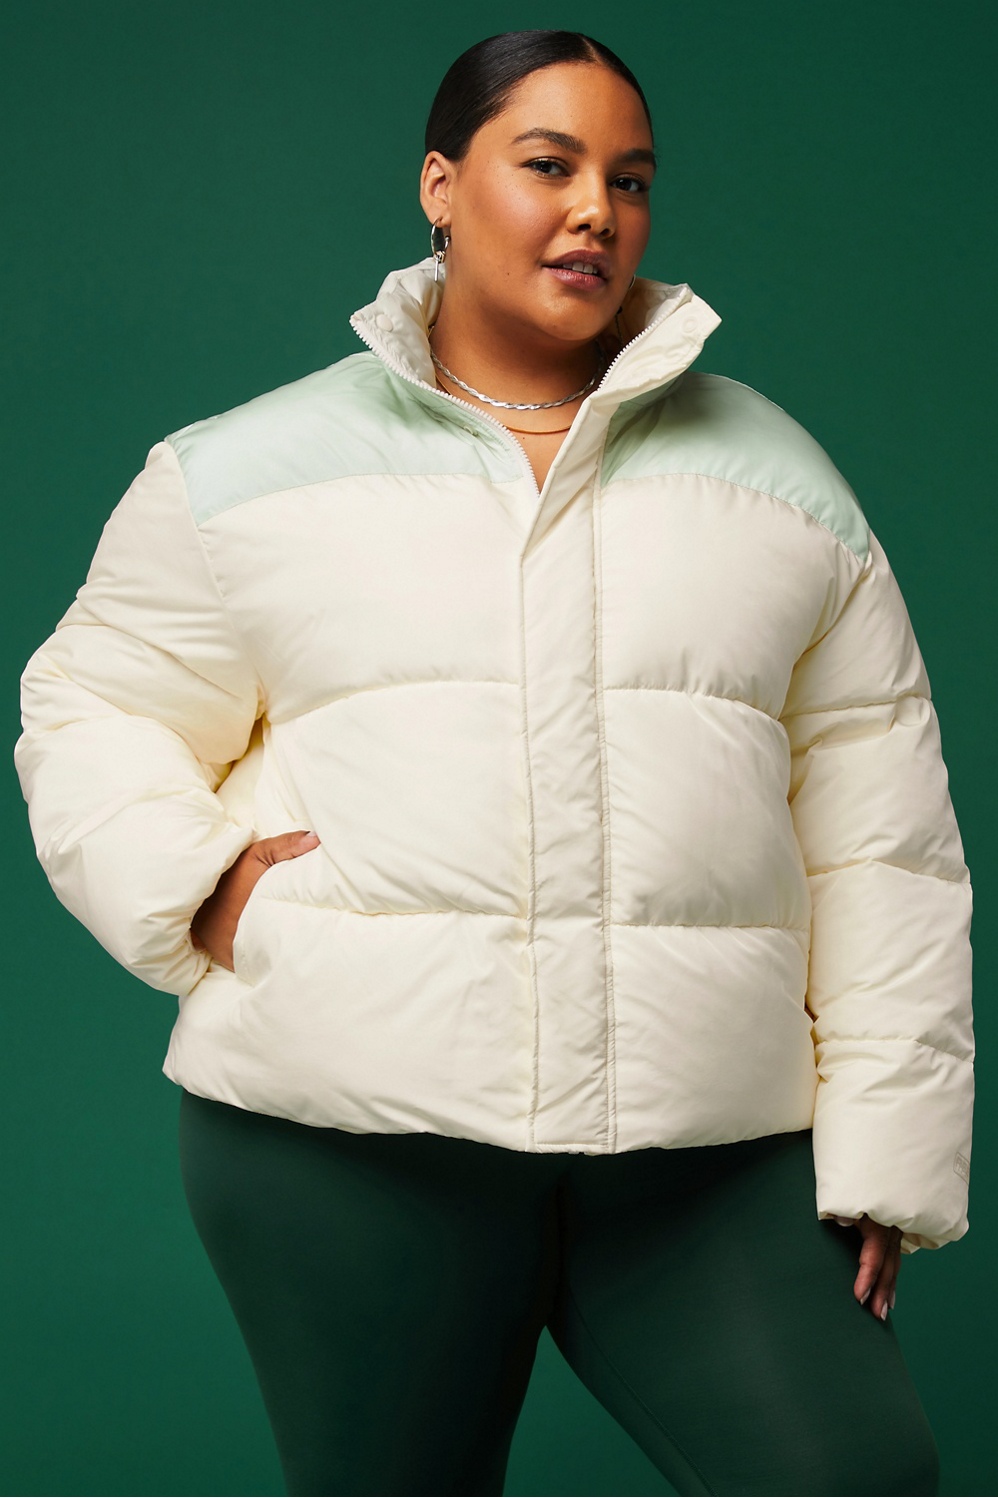 going to be wearing this @fabletics puffer all fall💛 #fableticsambass